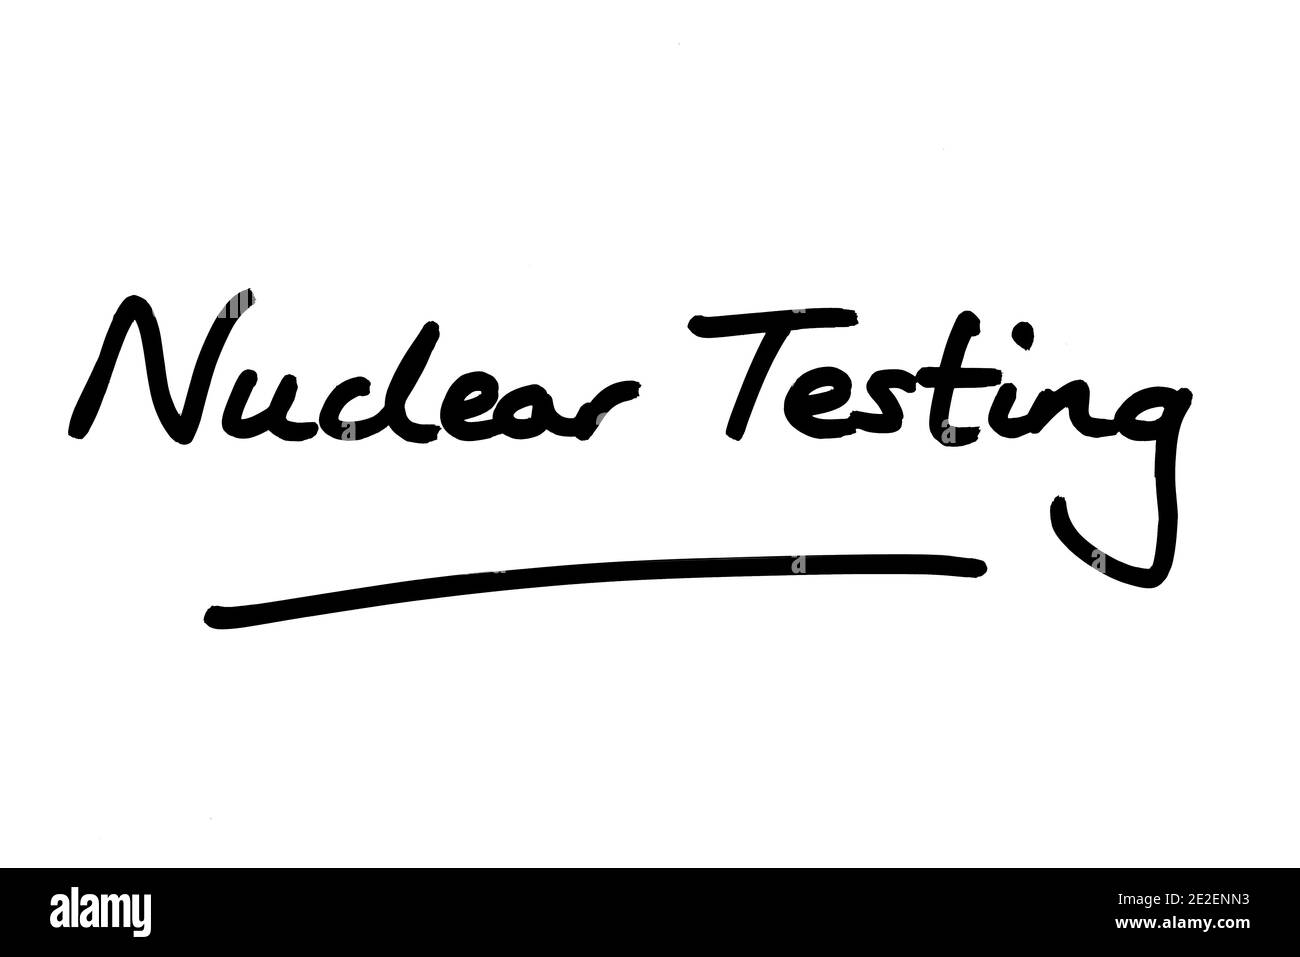 Nuclear Testing, handwritten on a white background. Stock Photo